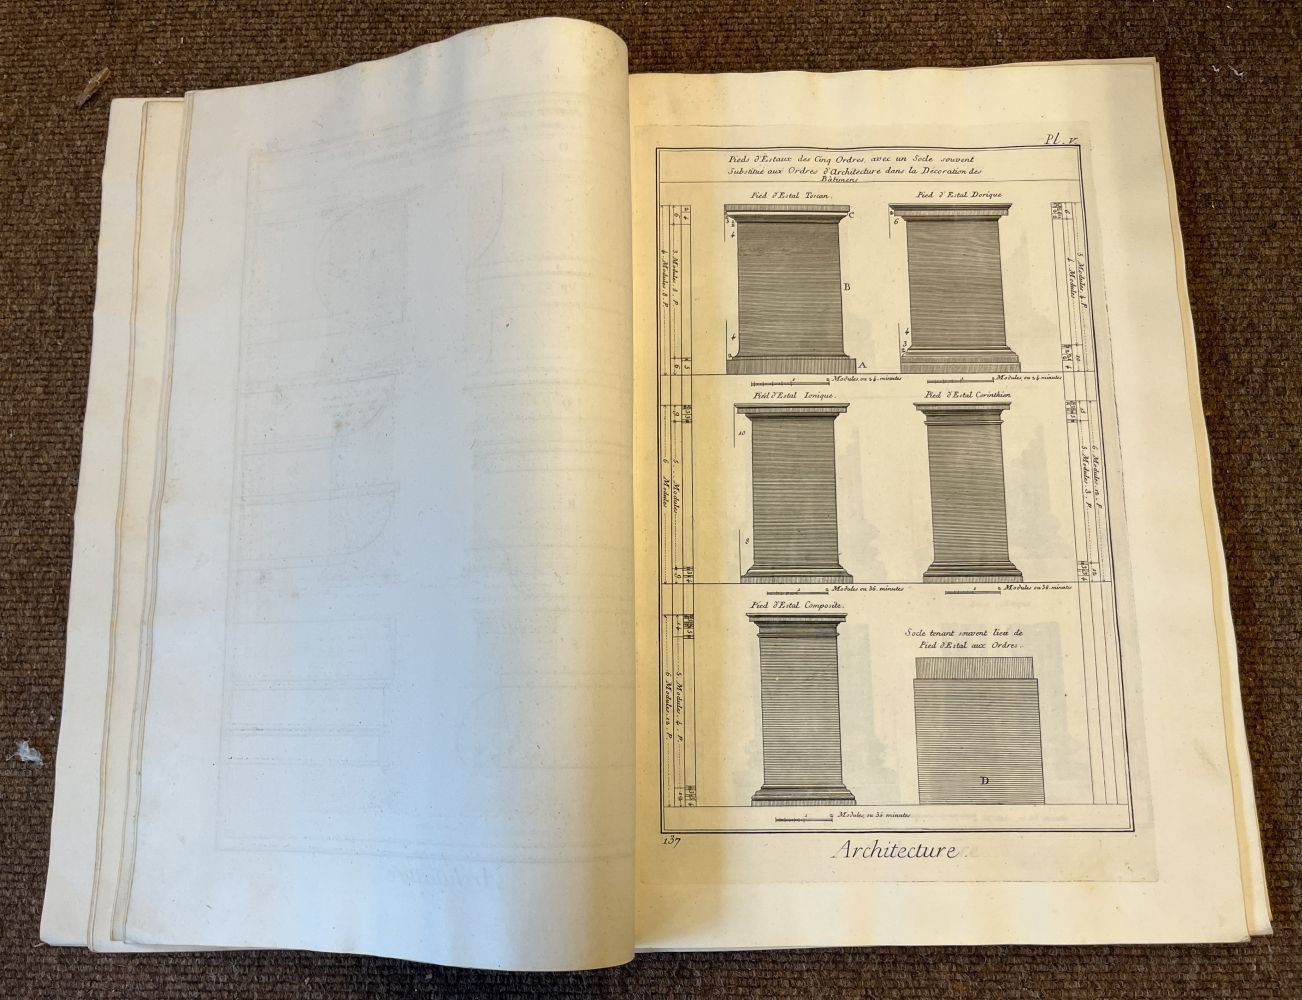 Diderot (Denis). A collection of 68 plates on architecture, 1765 - 72 - Image 5 of 9